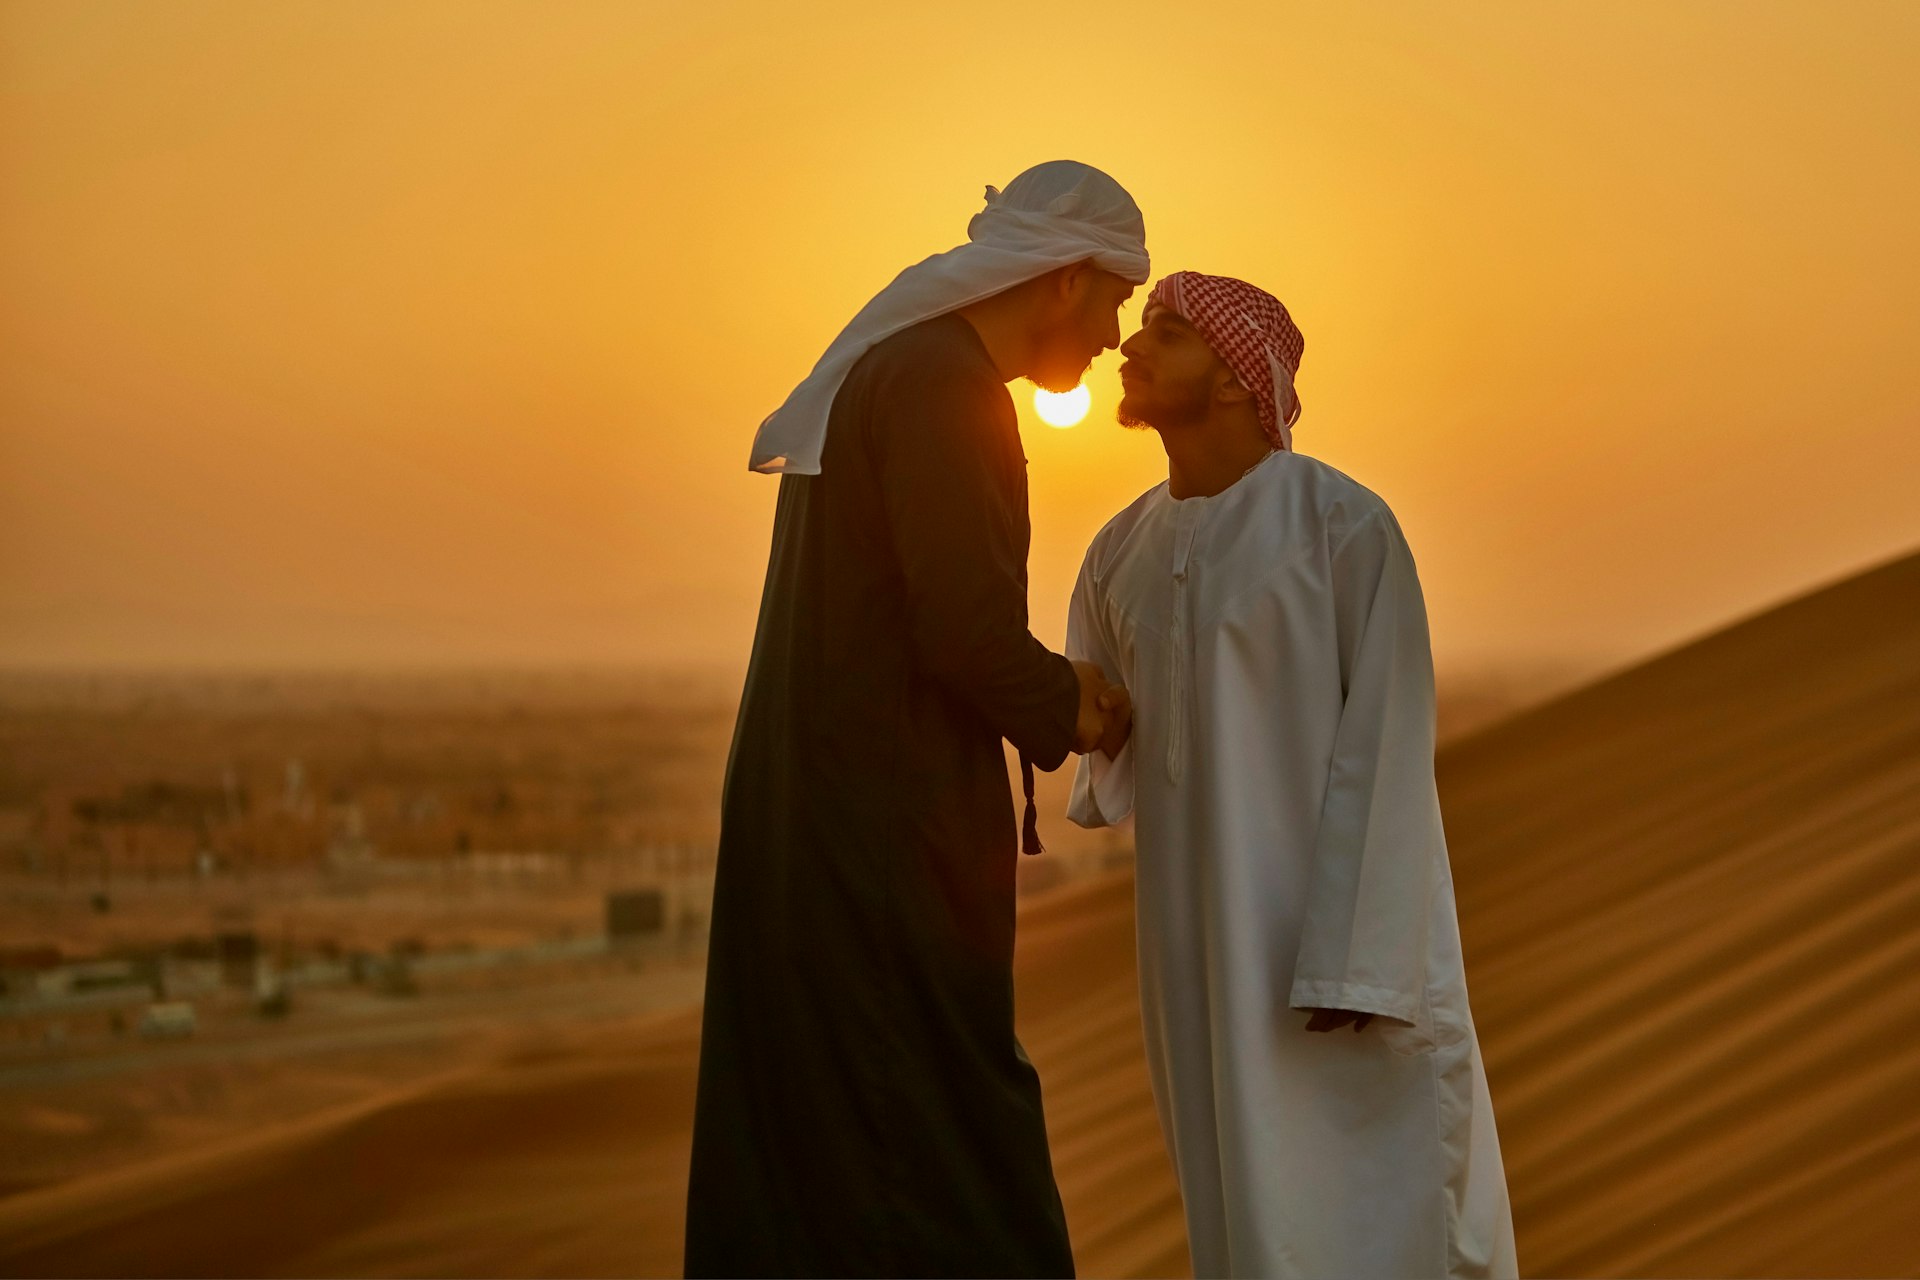 Middle Eastern men greeting each other with a handshake and nose rub in the desert at sunrise